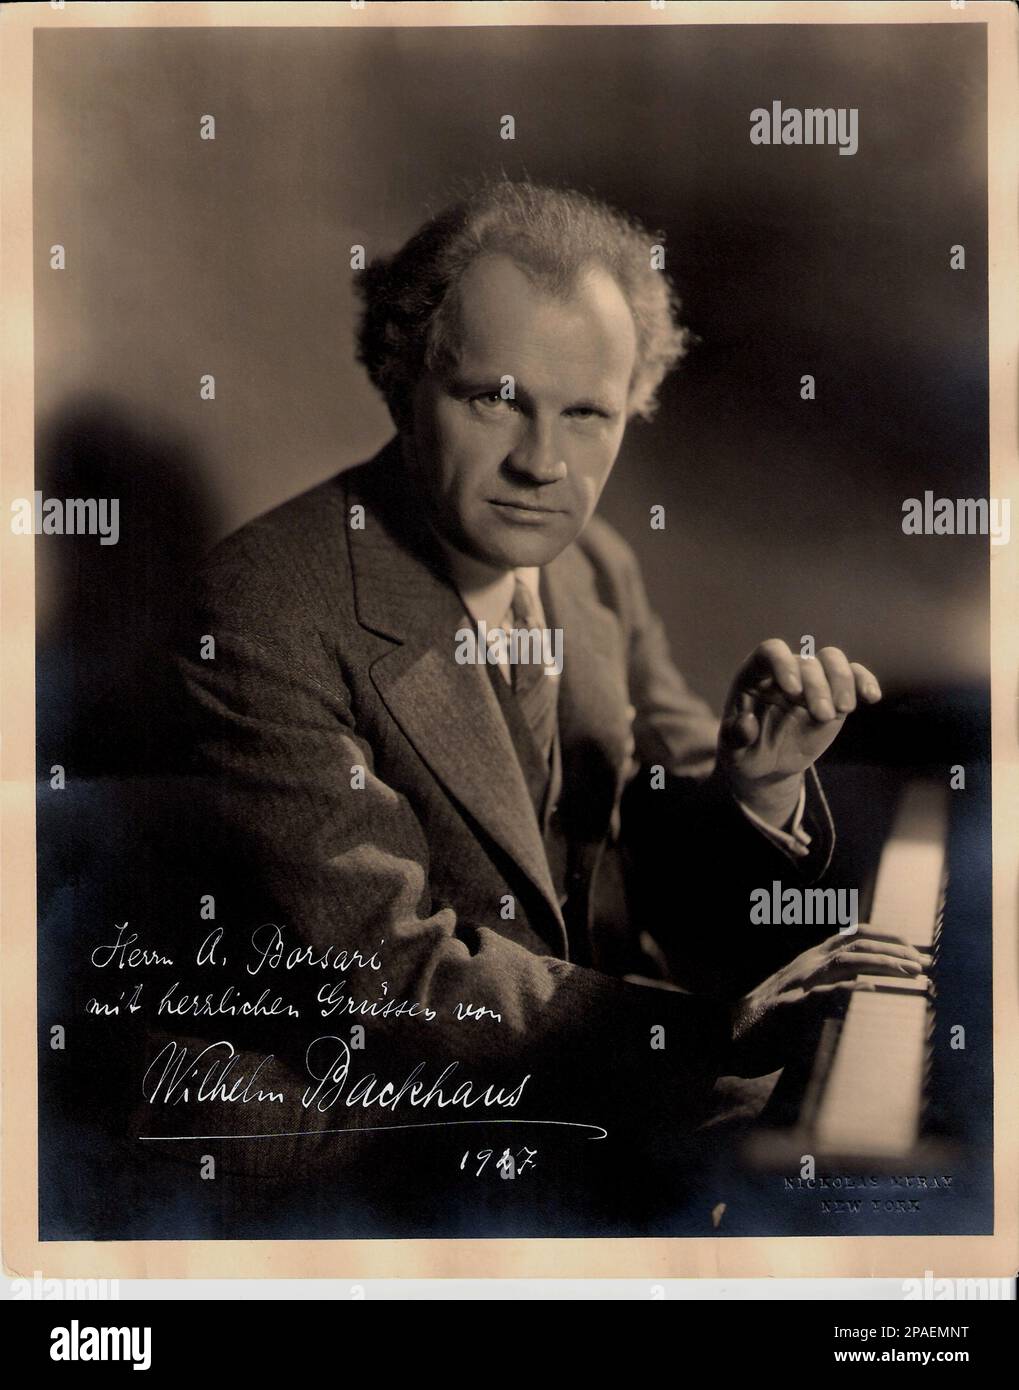 1927  : The german pianist virtuoso WILHELM BACKHAUS ( 1884 - 1969 ), autographed photo dedicated to Bologna musicologist Arnaldo  Borsari  . Photo by Nicholas Muray , New York . Born in Leipzig, Backhaus studied at the conservatoire in Leipzig with Alois Reckendorf until 1899, later taking private lessons with Eugen d'Albert in Frankfurt am Main. He made his first concert tour at the age of sixteen. In 1905 he won the Anton Rubinstein Competition with Bela Bartok taking second place. He toured widely throughout his life - in 1921 he gave seventeen concerts in Buenos Aires in less than three w Stock Photo